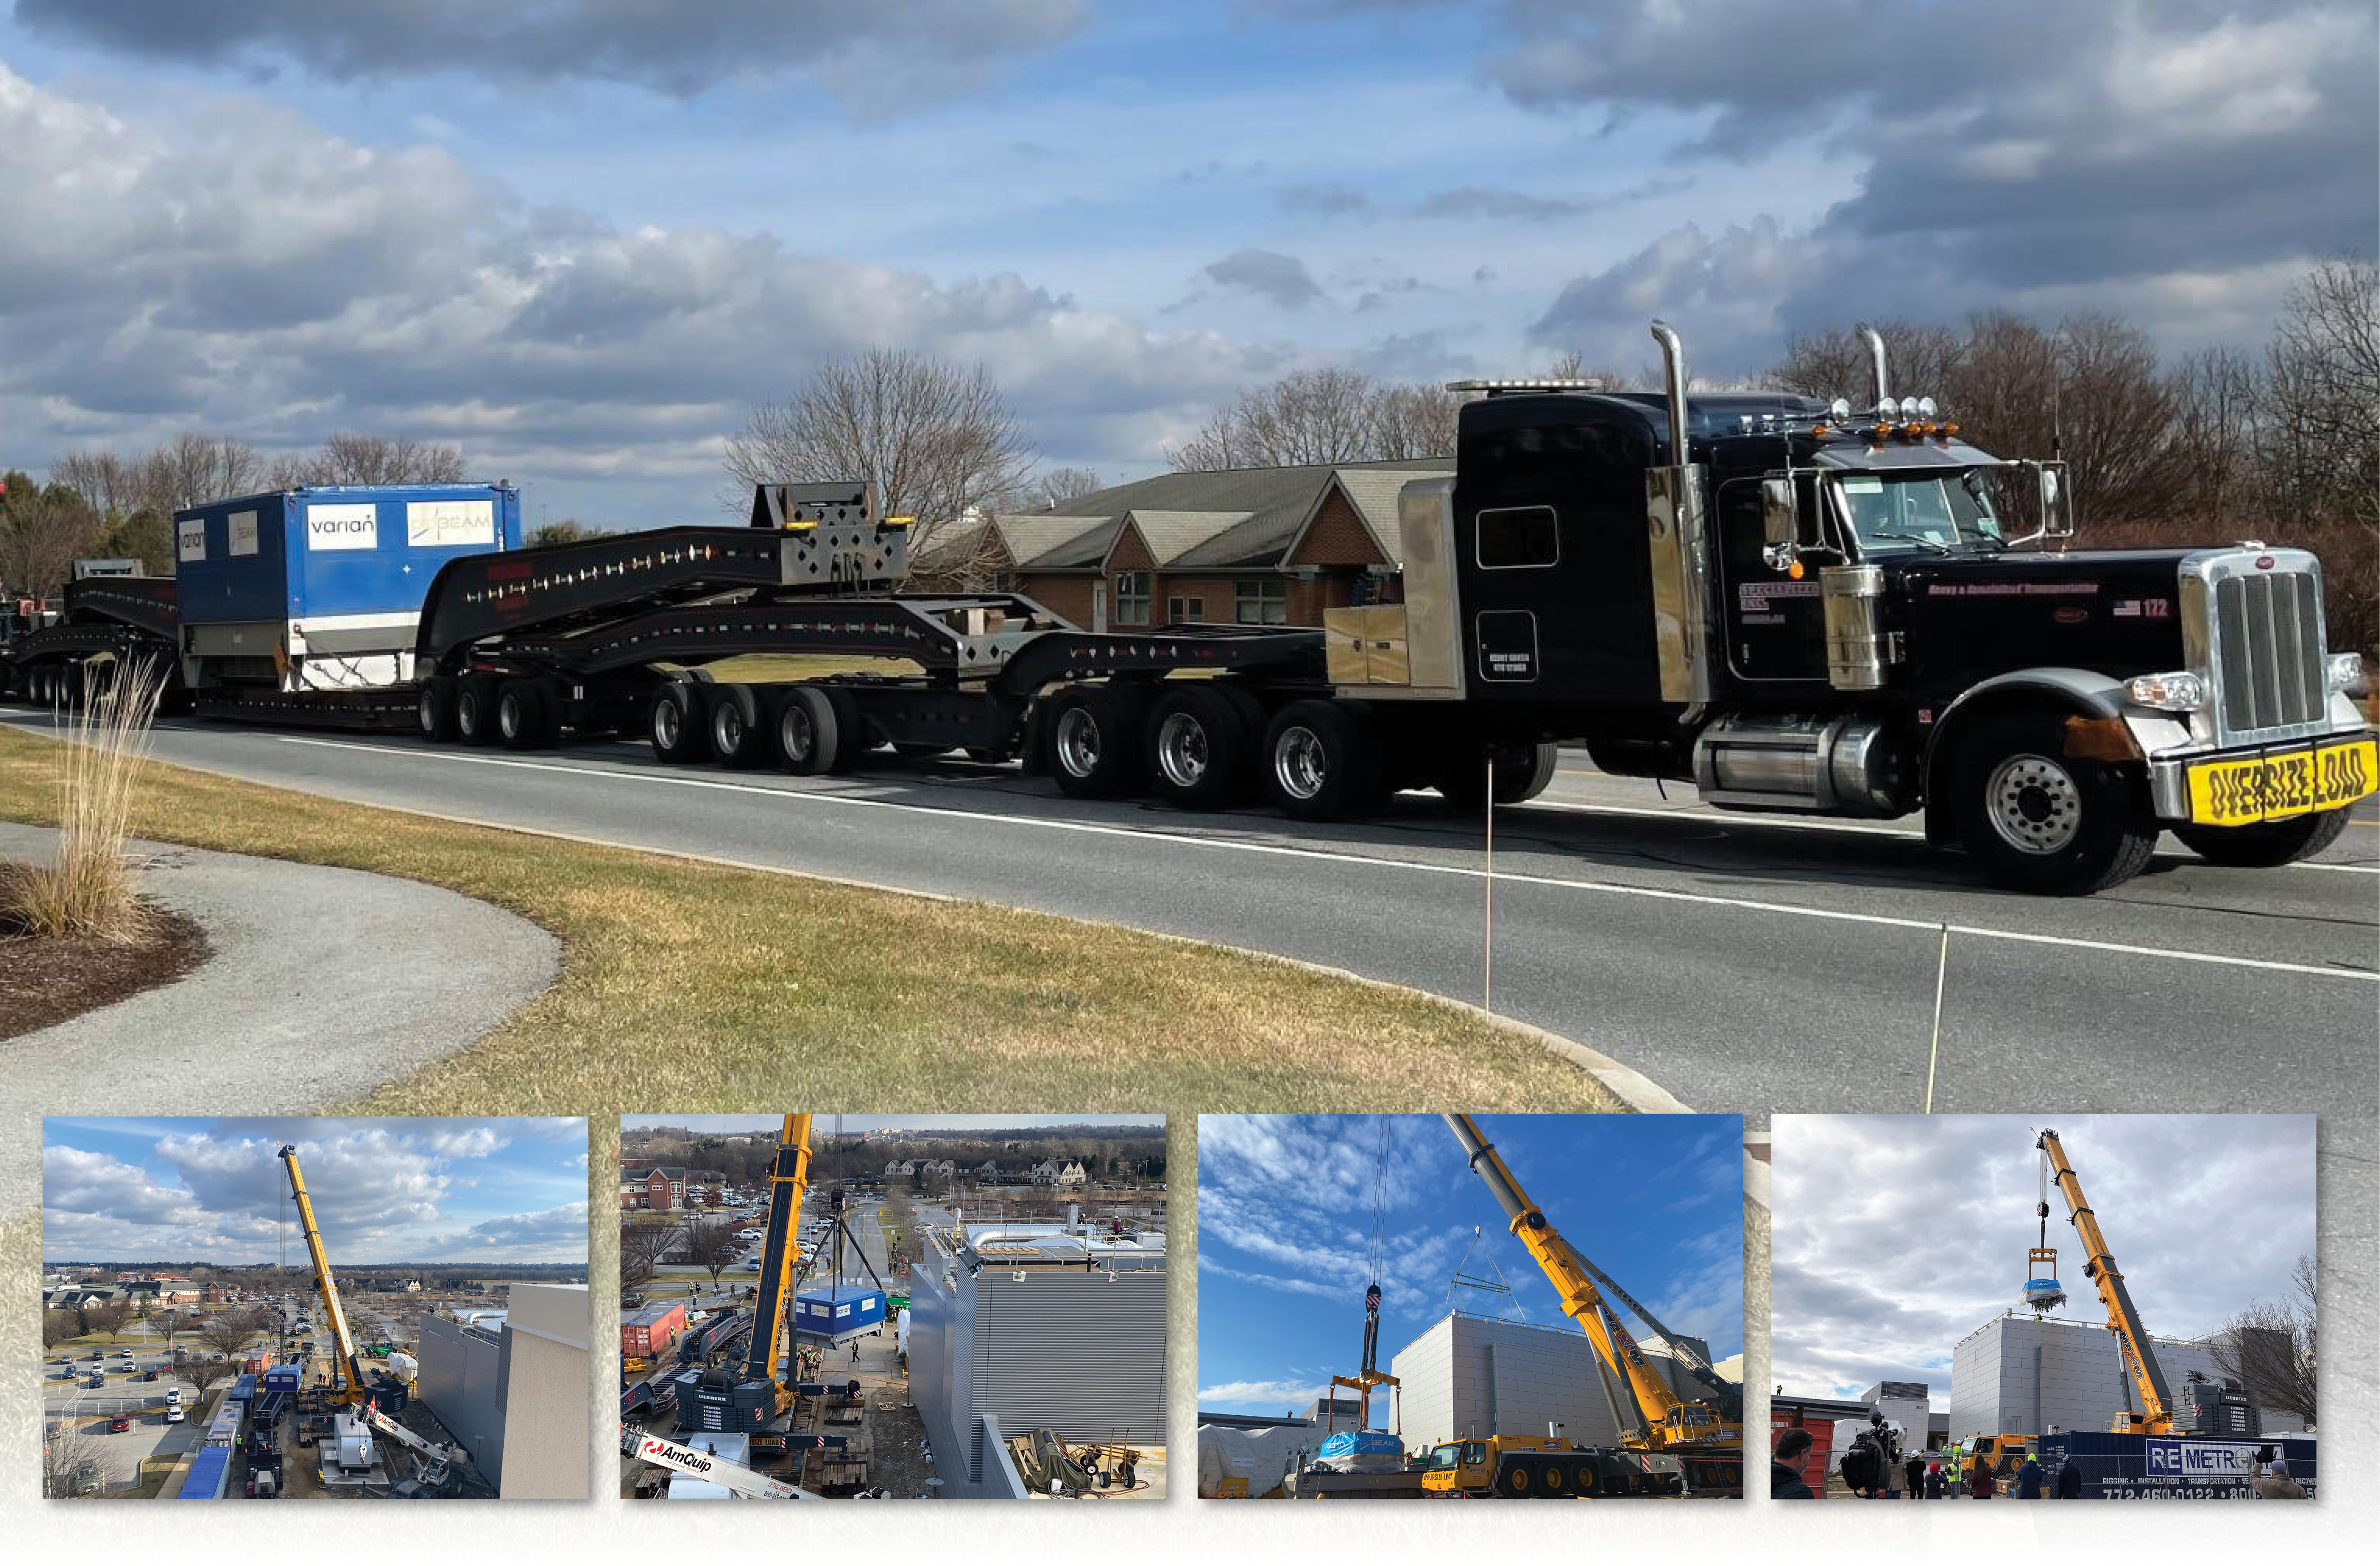 images of the arrival and installation of the Proton Center's cyclotron at Penn Medicine Lancaster General Health